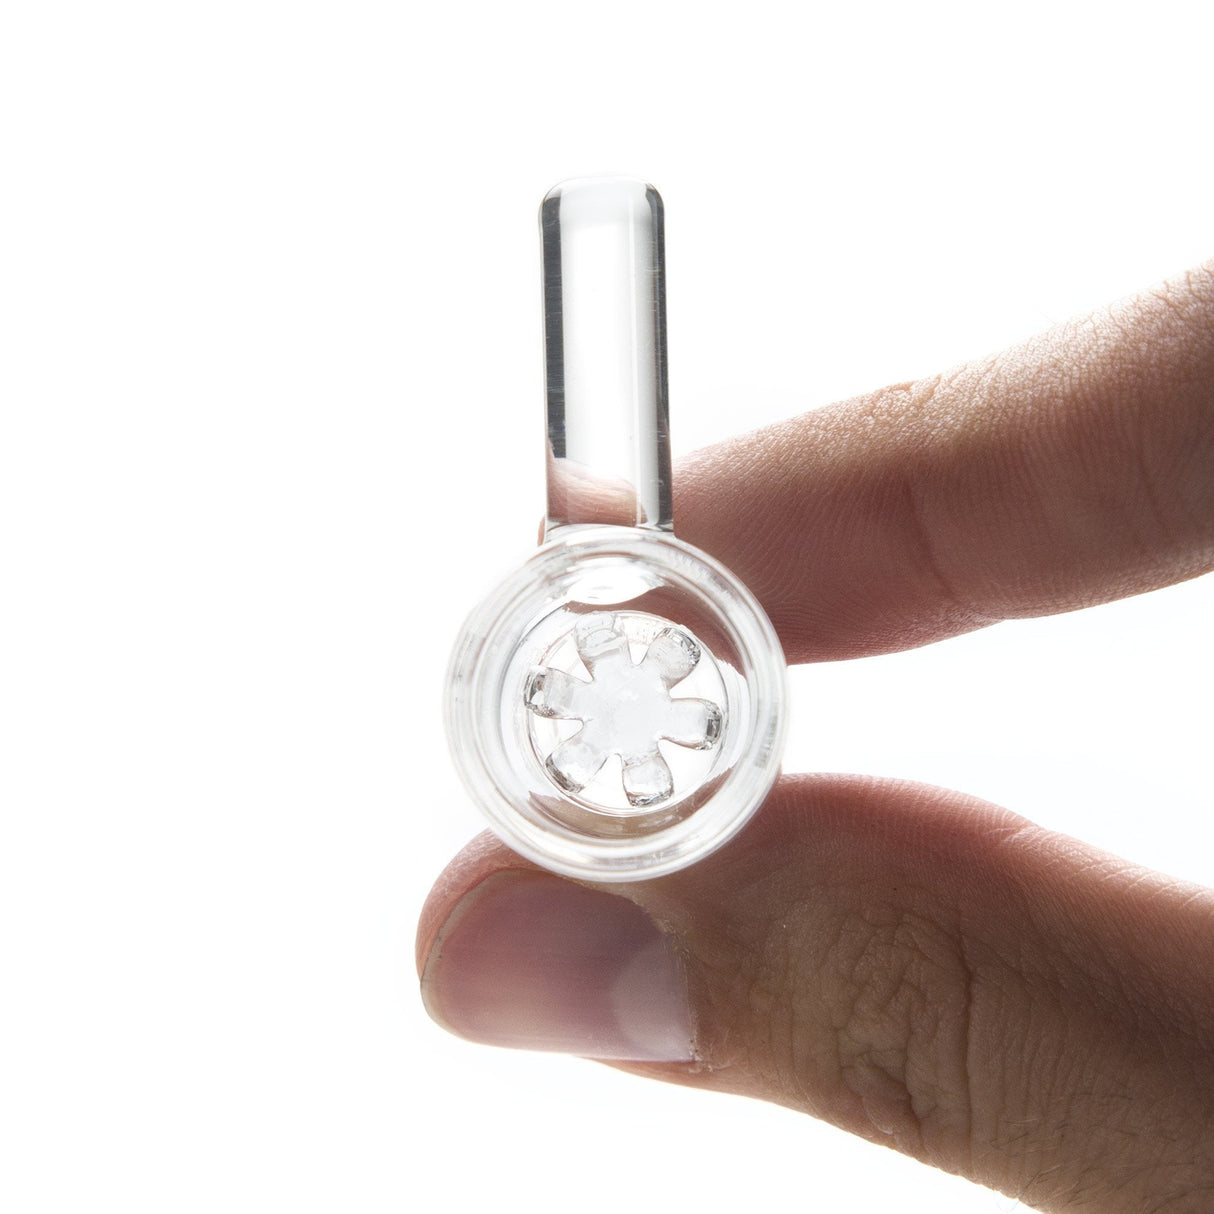 GRAV 14mm Female Octobowl with Built-in Screen, Close-up Held in Hand